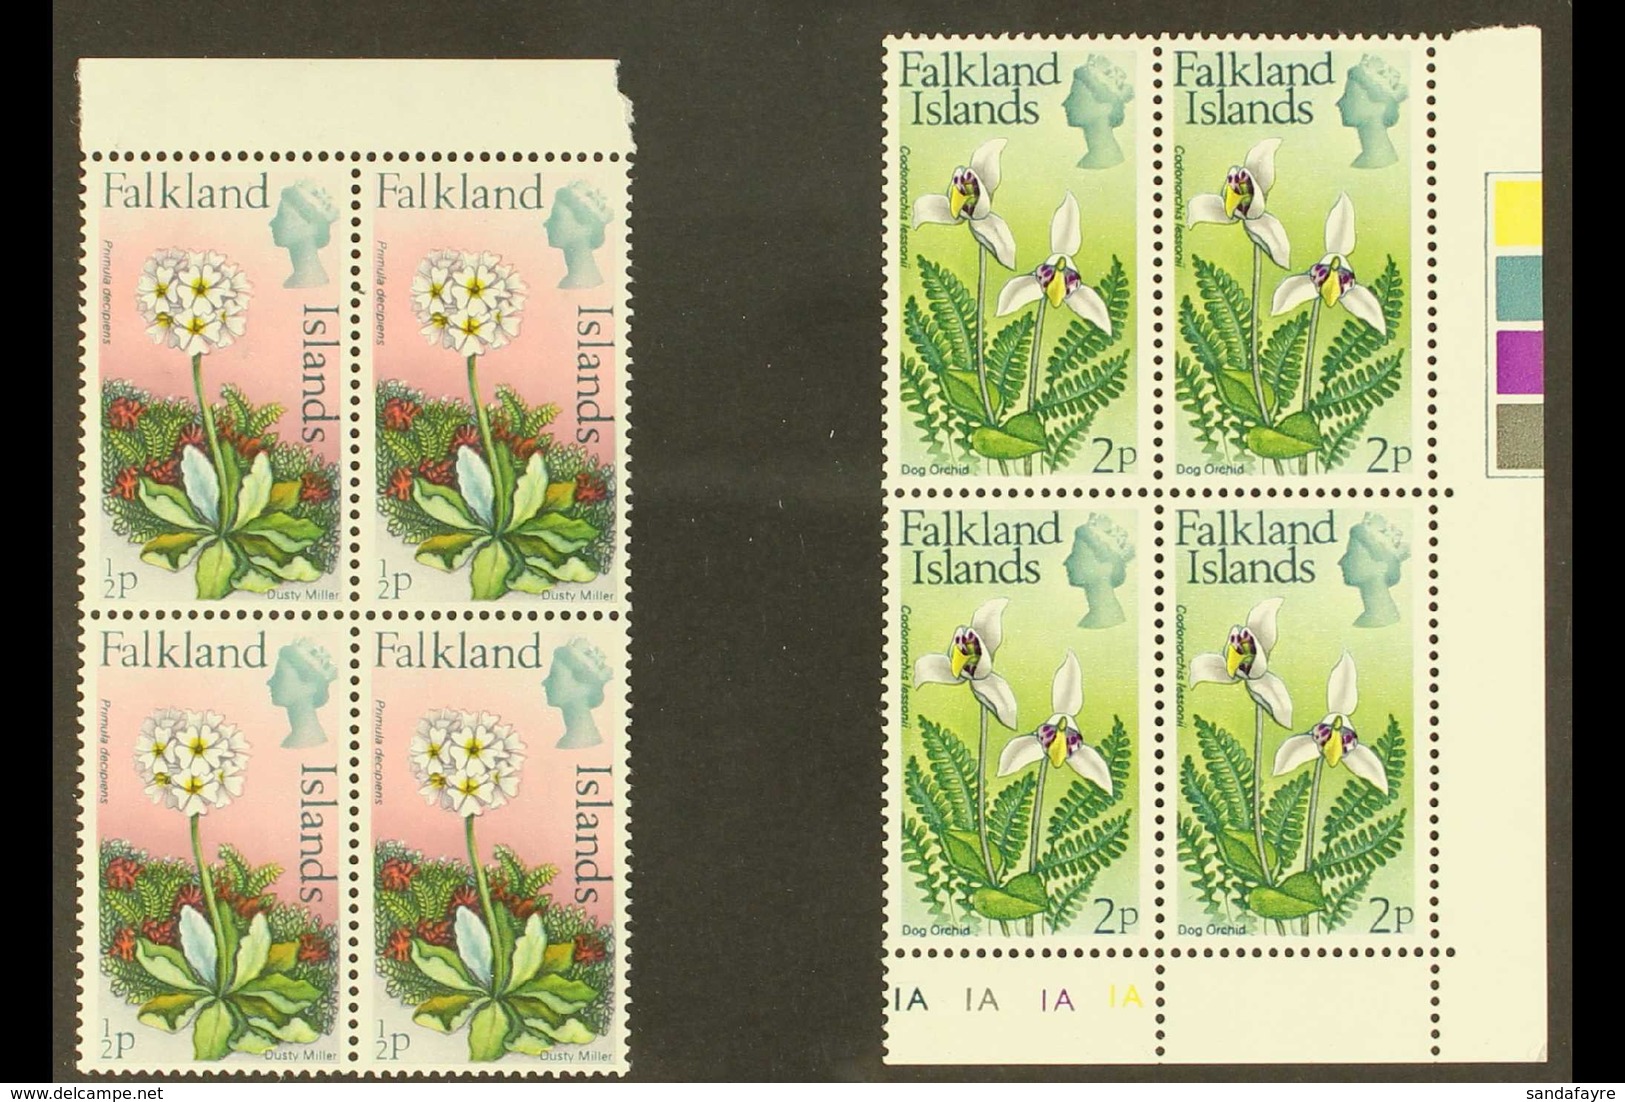 1974 Flowers Definitive ½d And 2d With Watermark Upright, SG 293/94, Never Hinged Mint Marginal BLOCKS OF FOUR. (2 Block - Falklandinseln